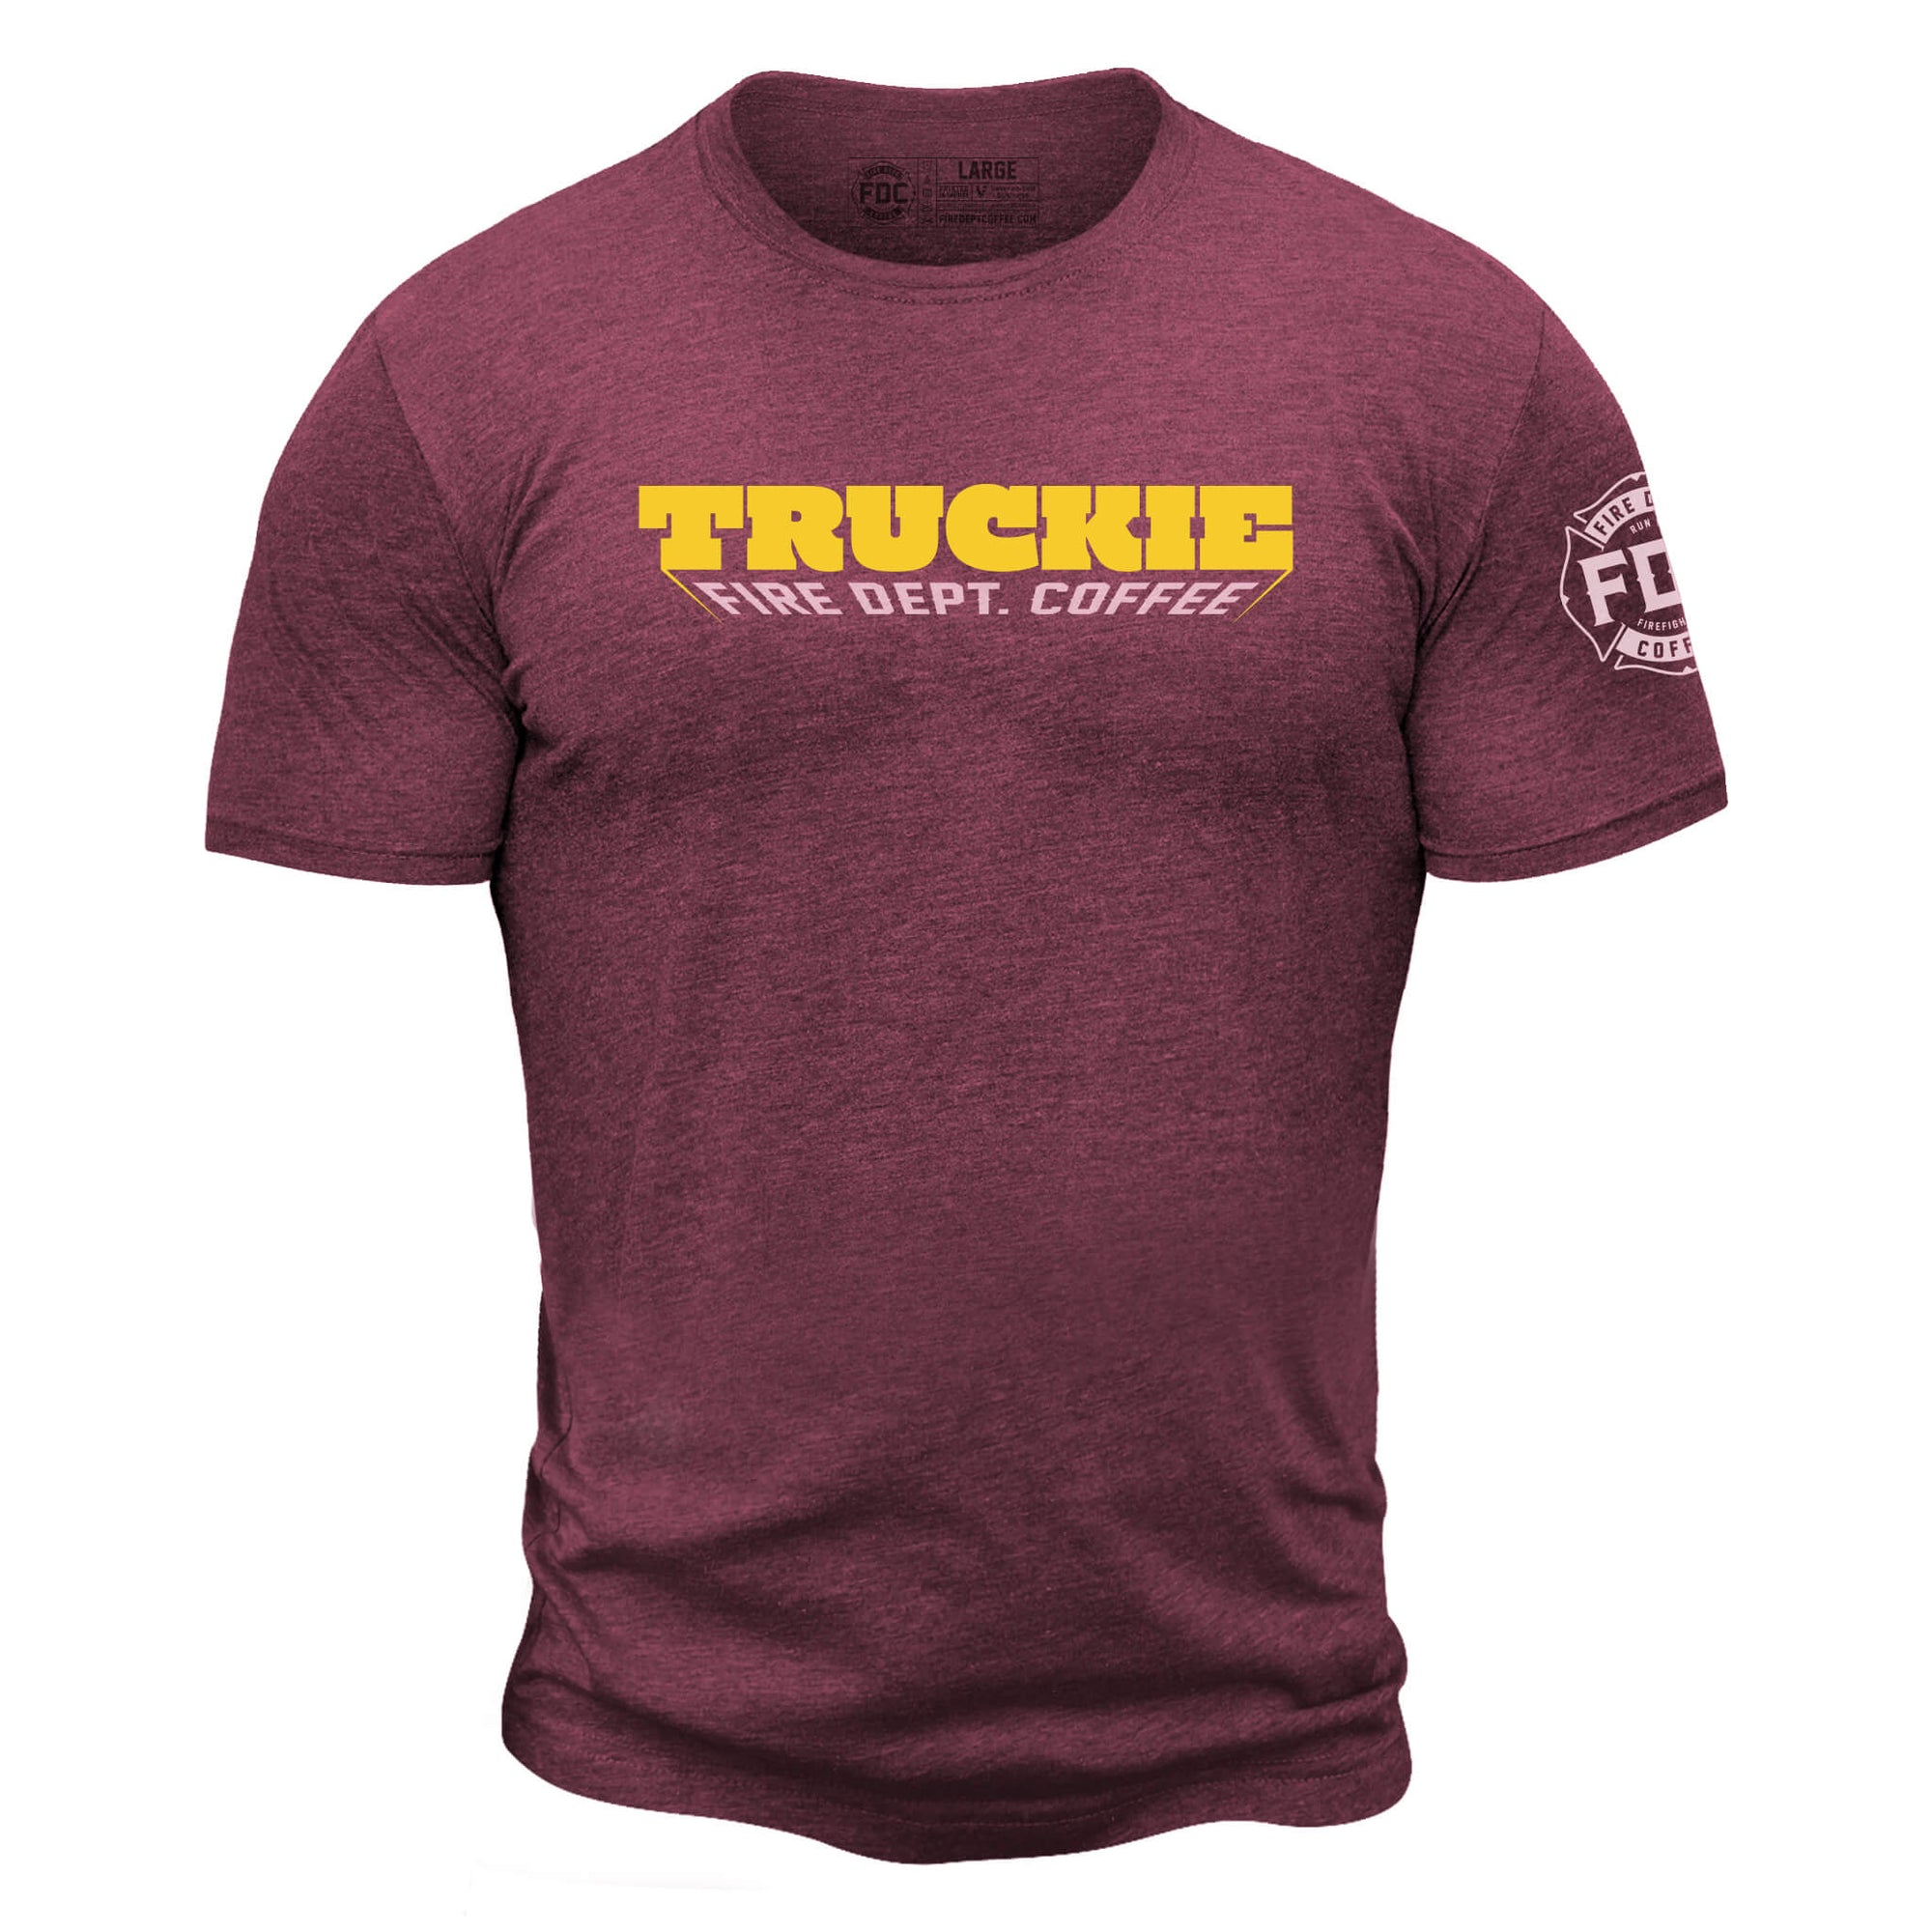 Maroon shirt with "truckie" in bold yellow lettering and "Fire Dept. Coffee" below. FDC maltese cross logo is on the sleeve.